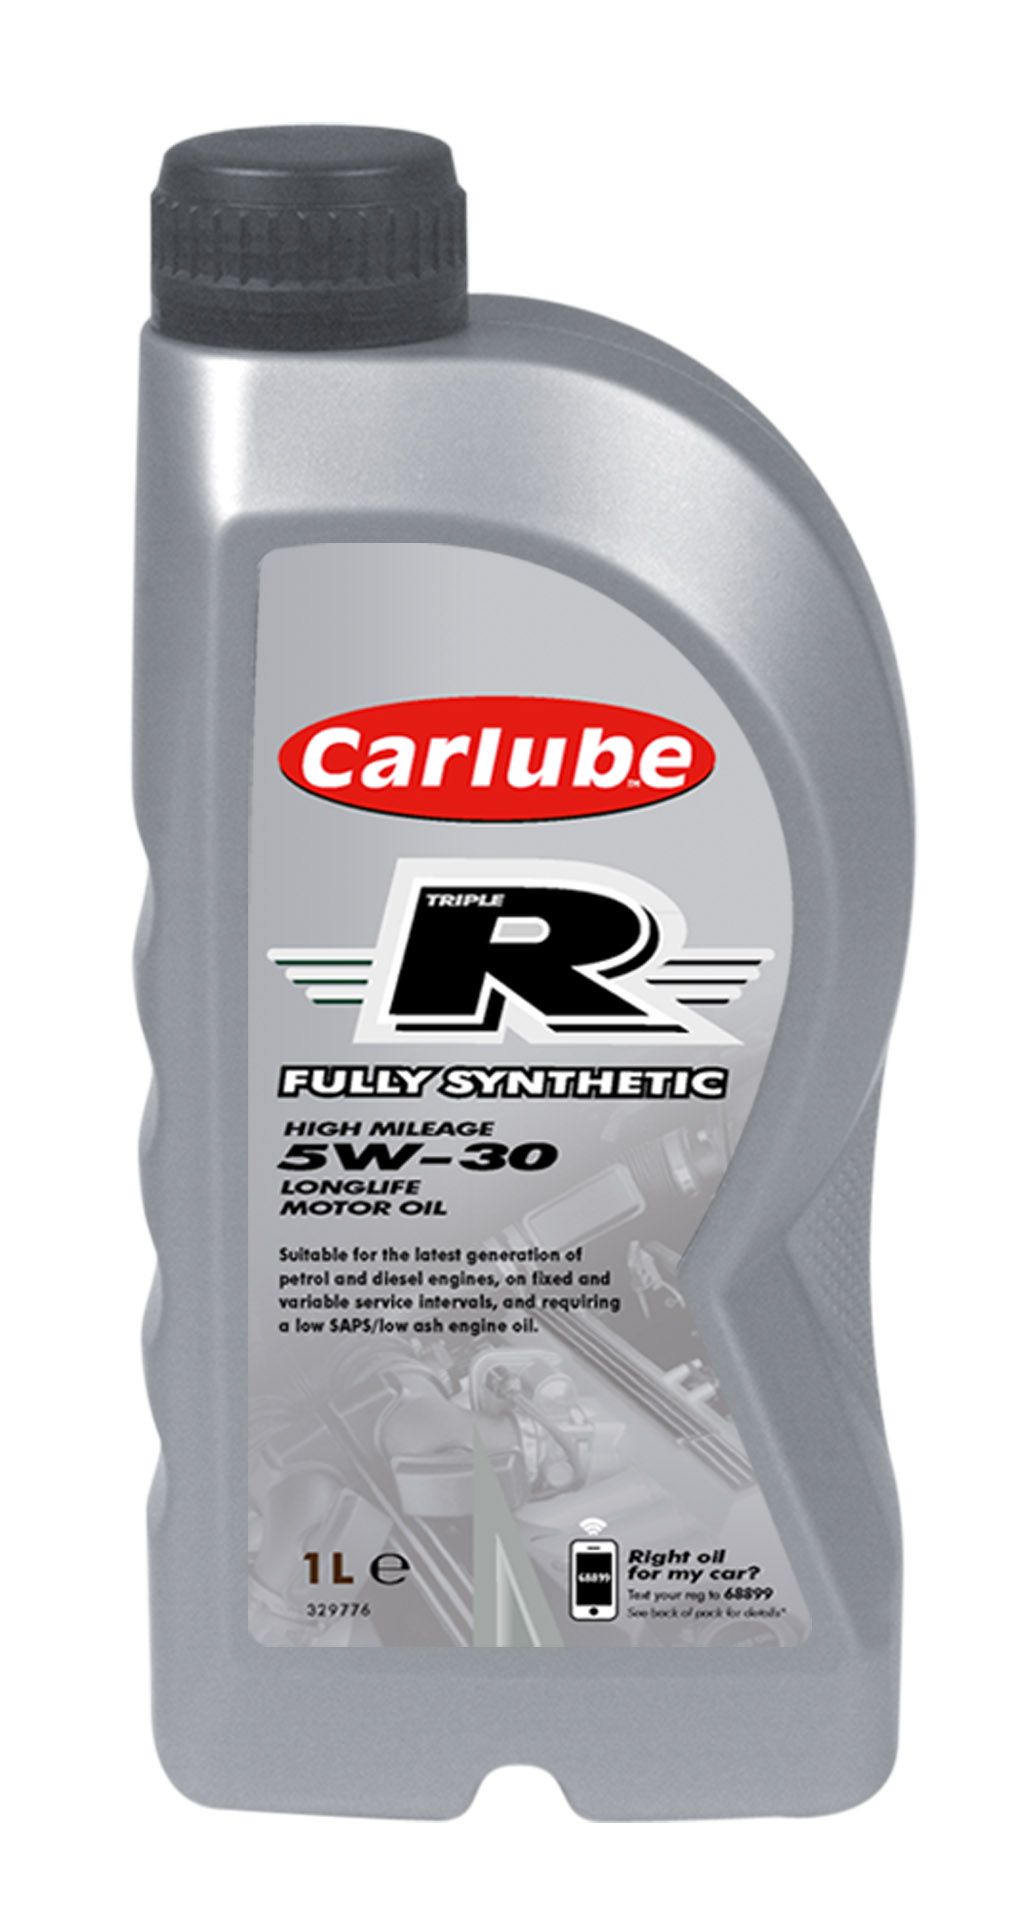 Carlube Longlife Fully-synthetic Engine oil, 1L Bottle